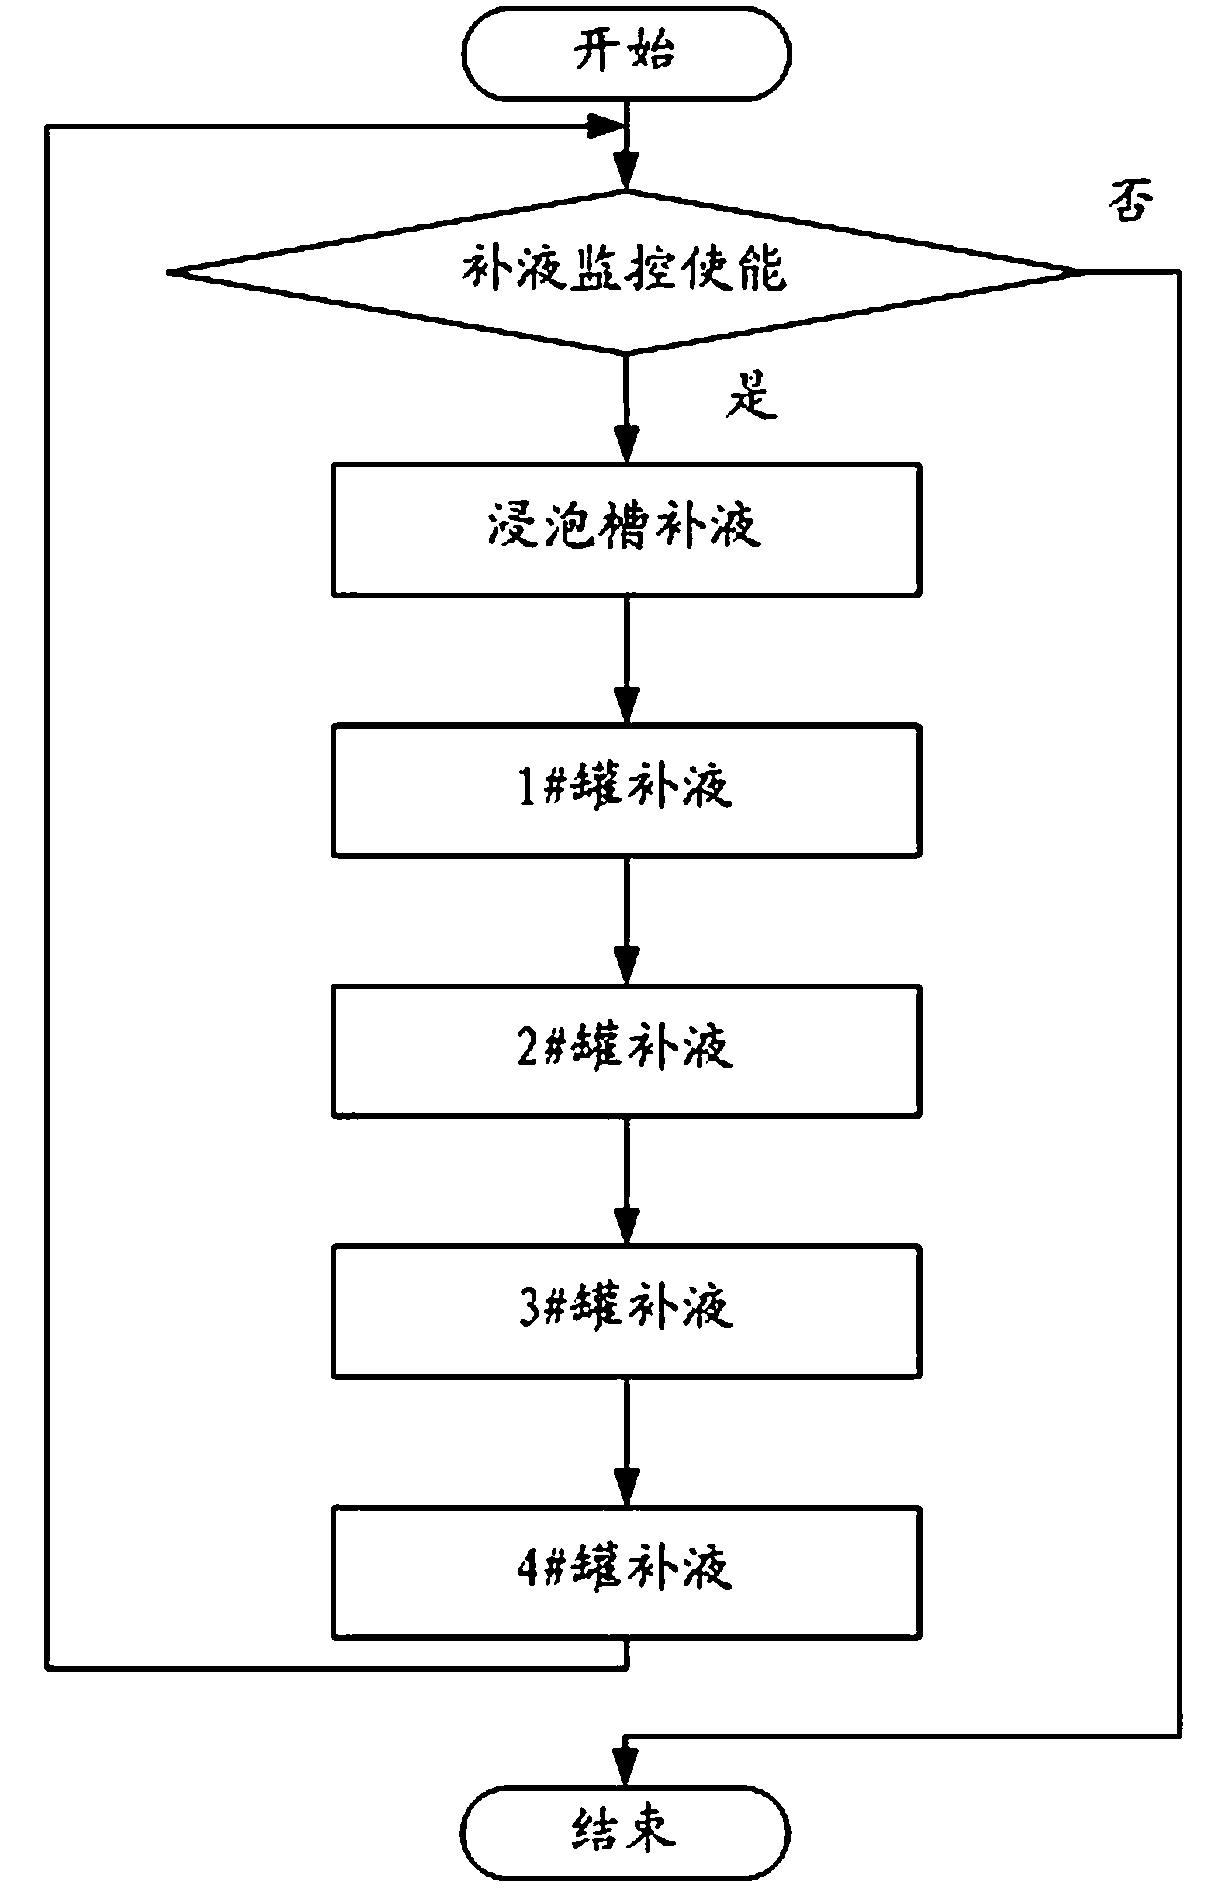 Automatic liquid adding system for metal film stripping and cleaning device